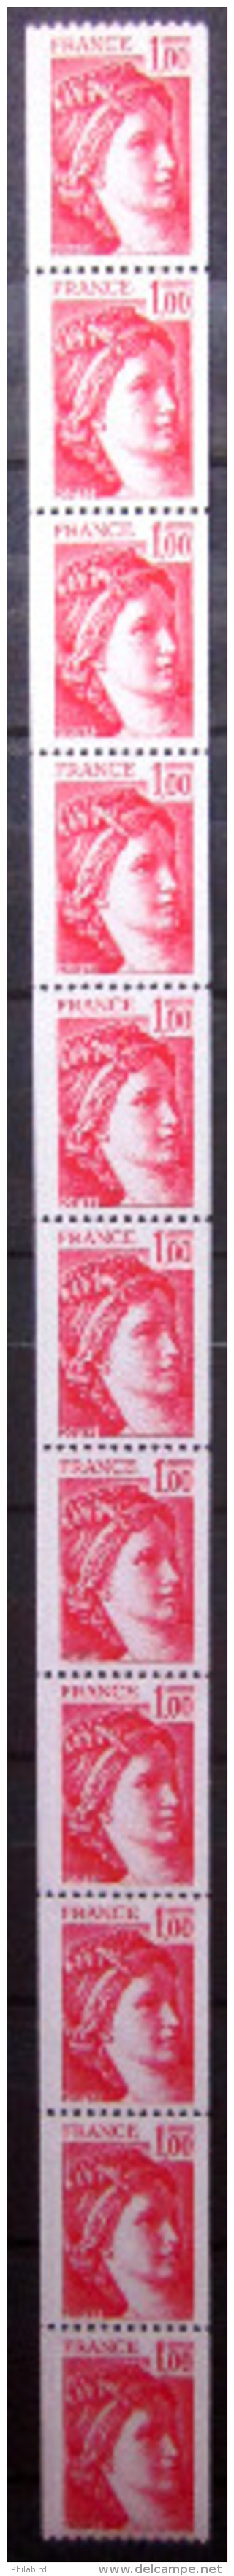 FRANCE            ROULETTE  70  (11 Timbres)            NEUF** - Roulettes